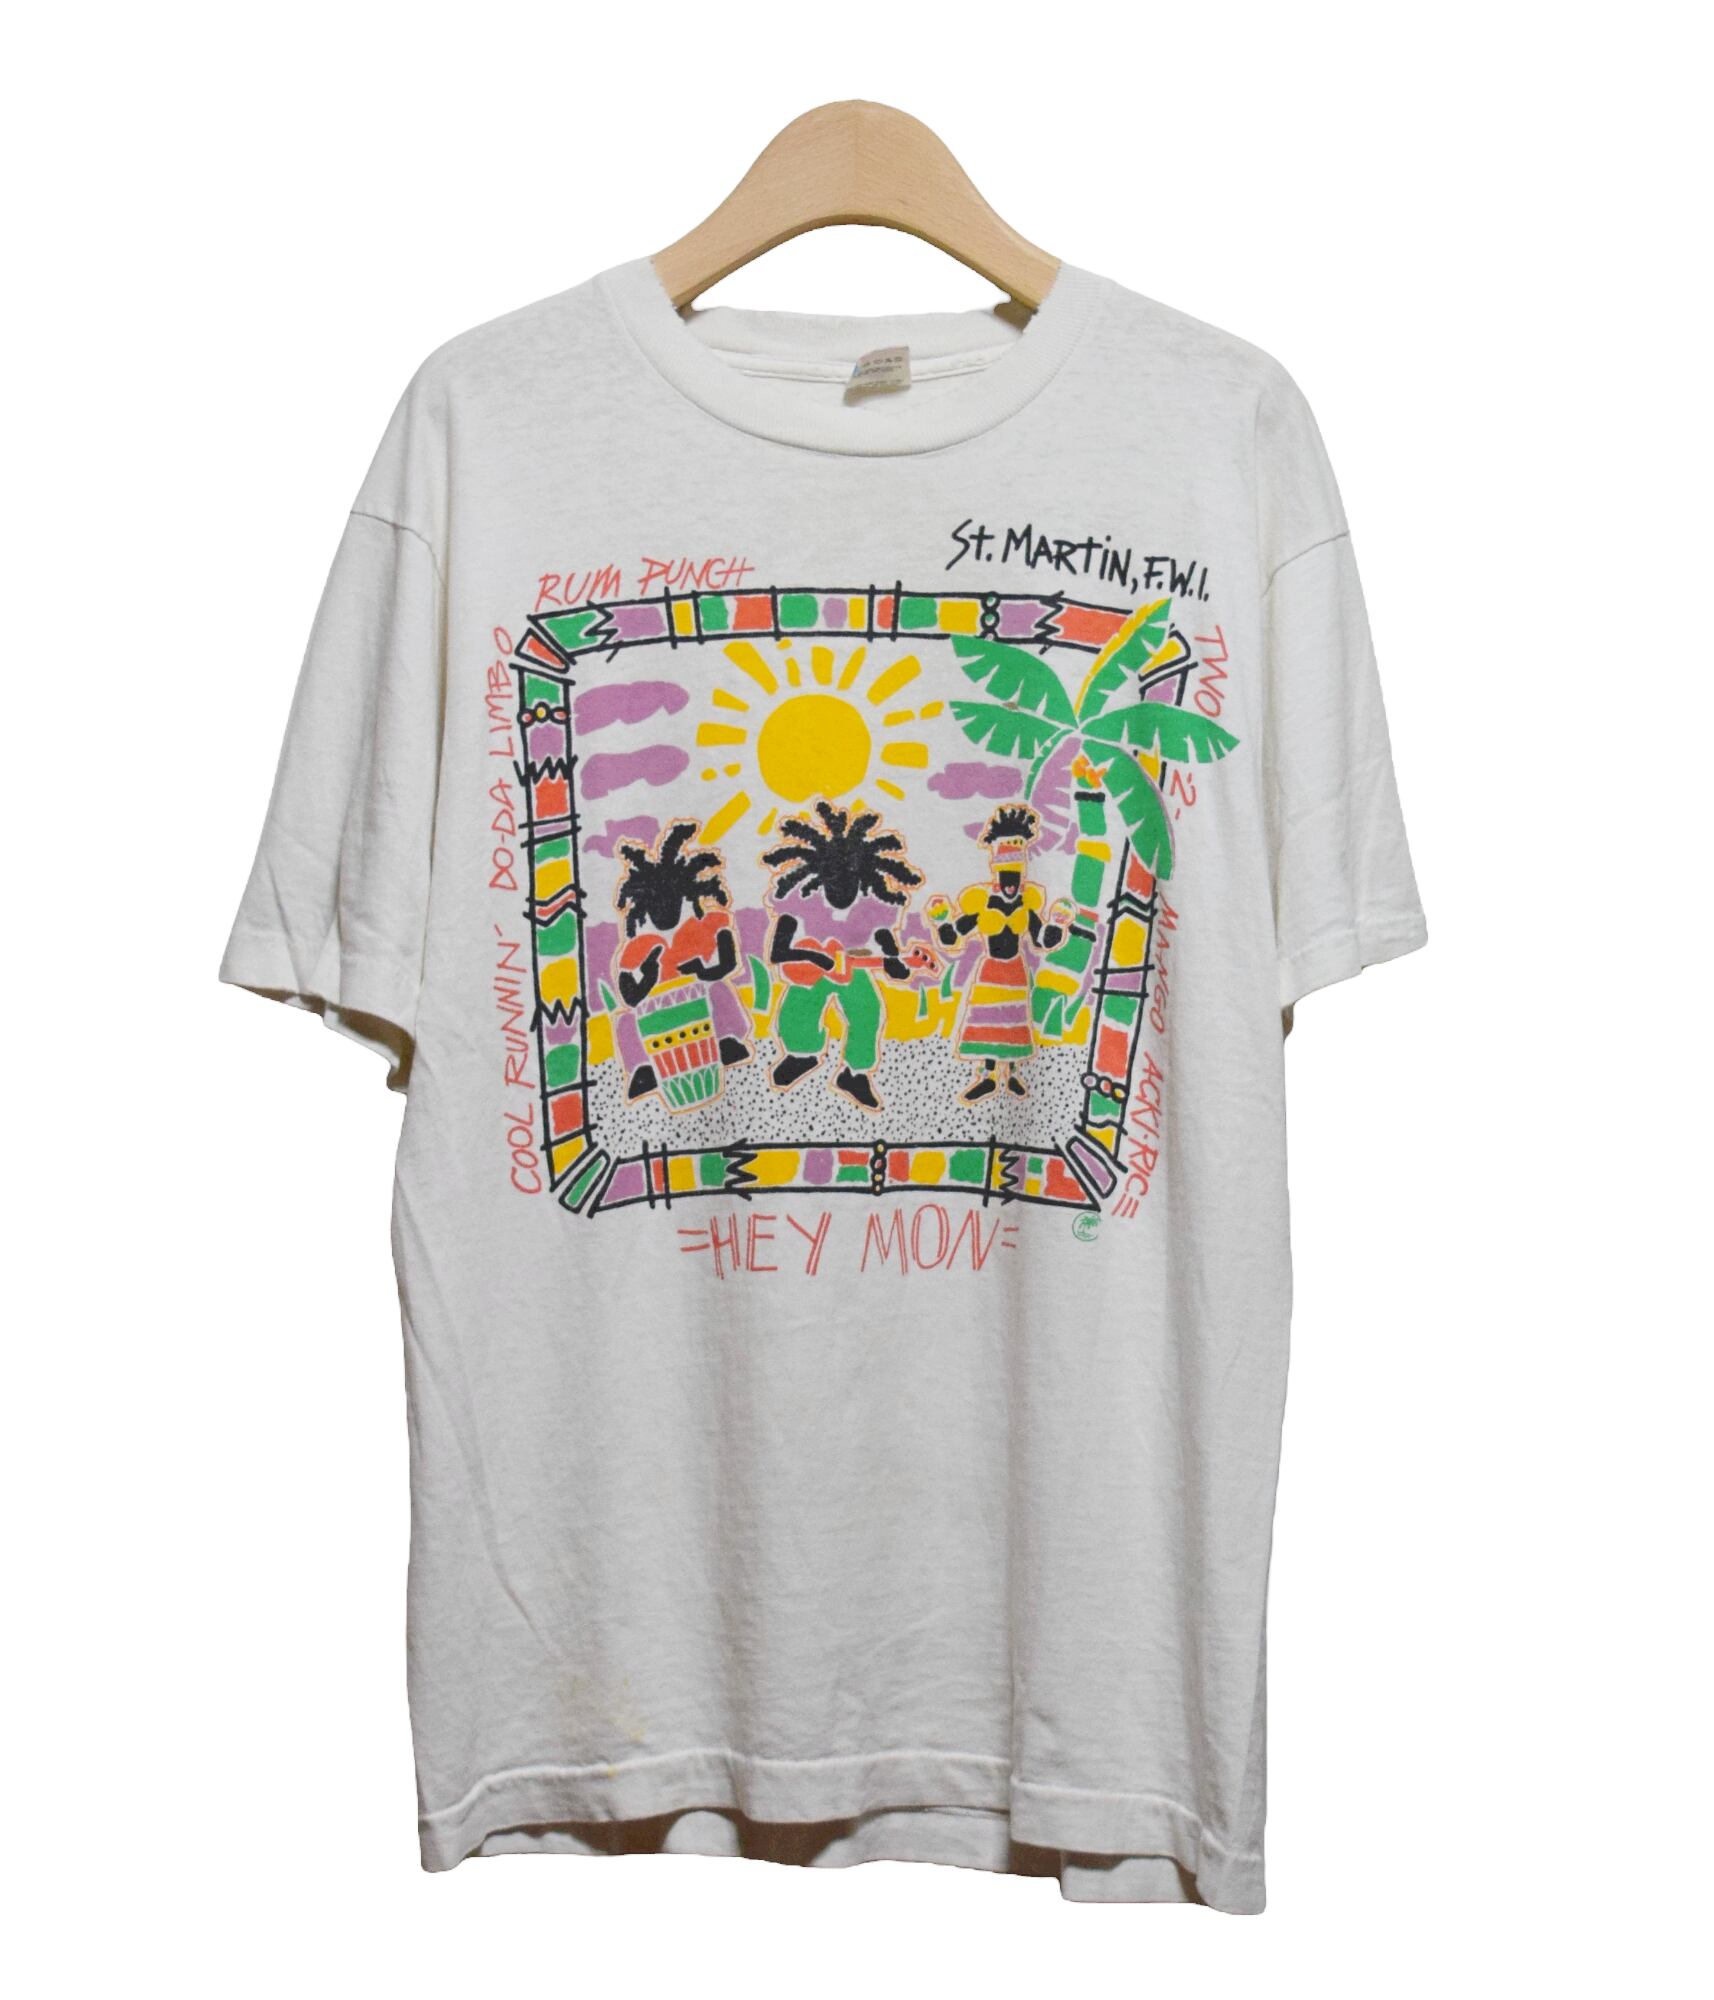 Vintage 80-90s L Fruit of the loom T-shirt -St. Martin- | BEGGARS  BANQUET公式通販サイト 古着・ヴィンテージ